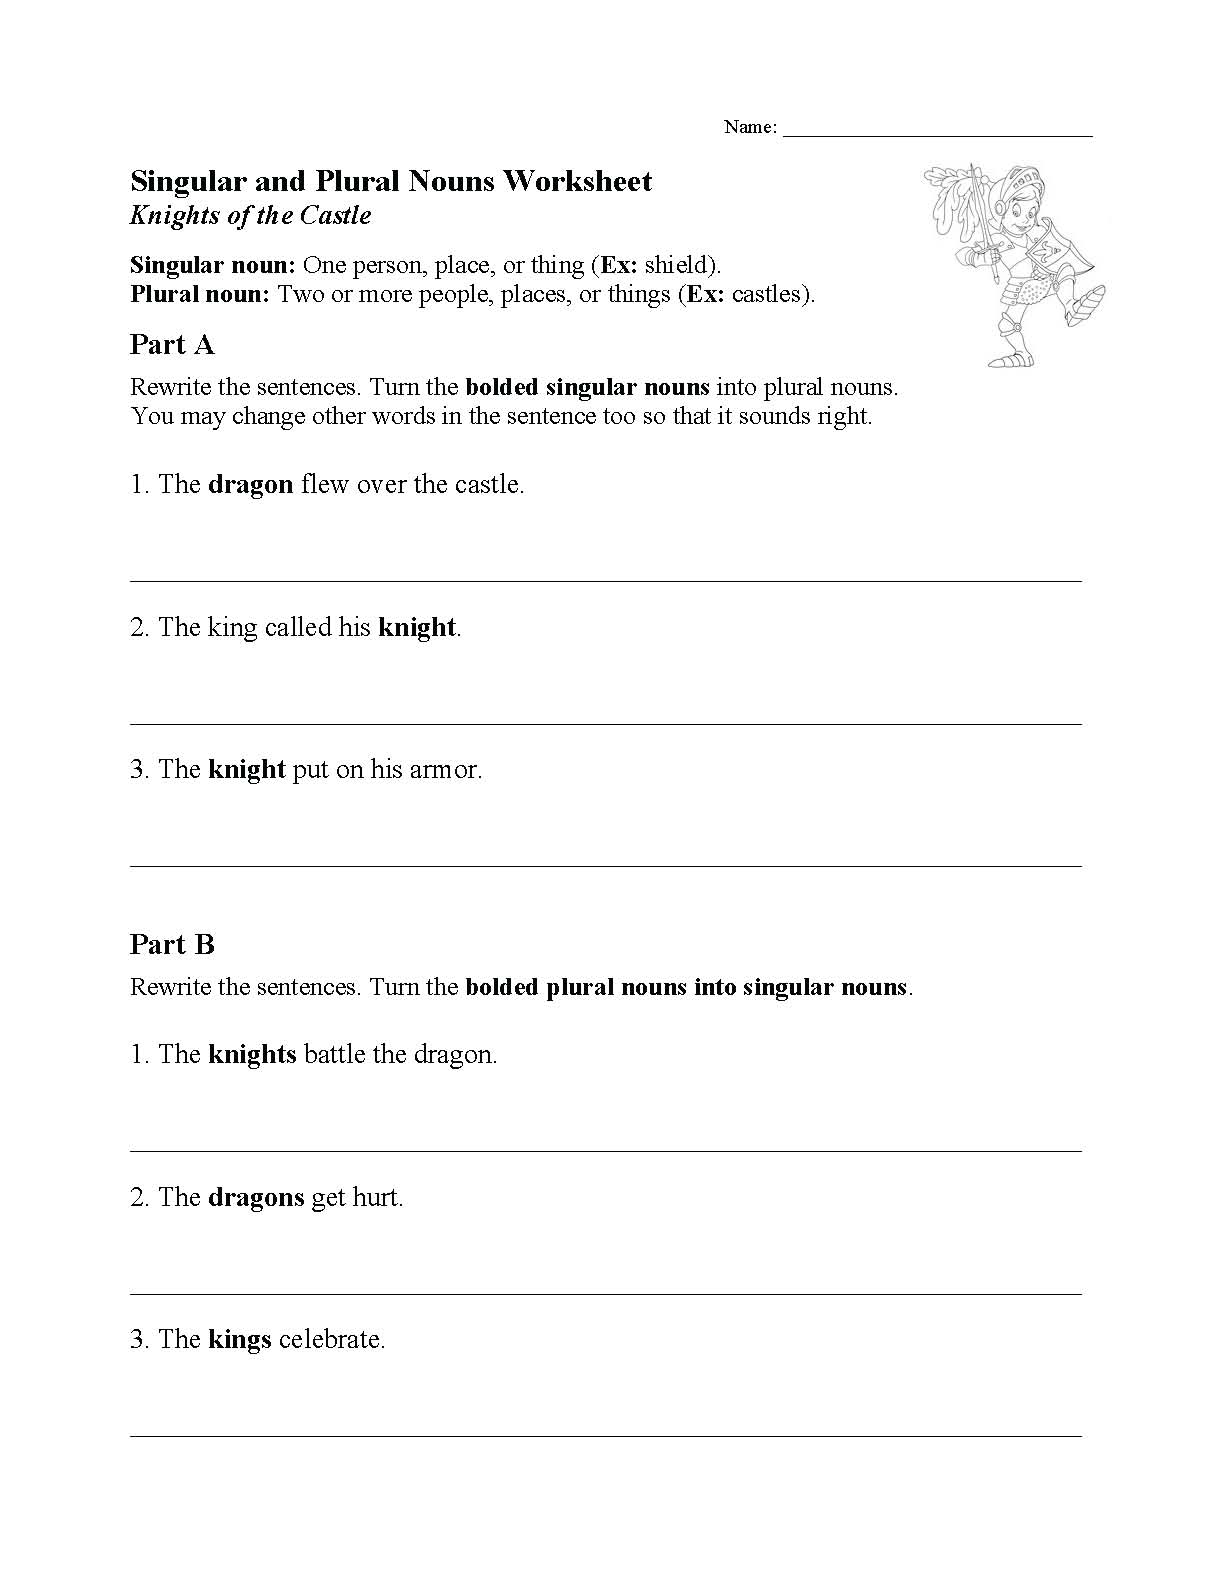 This is a preview image of our Singular and Plural Nouns Worksheet. Click on it to enlarge this image and view the source file.